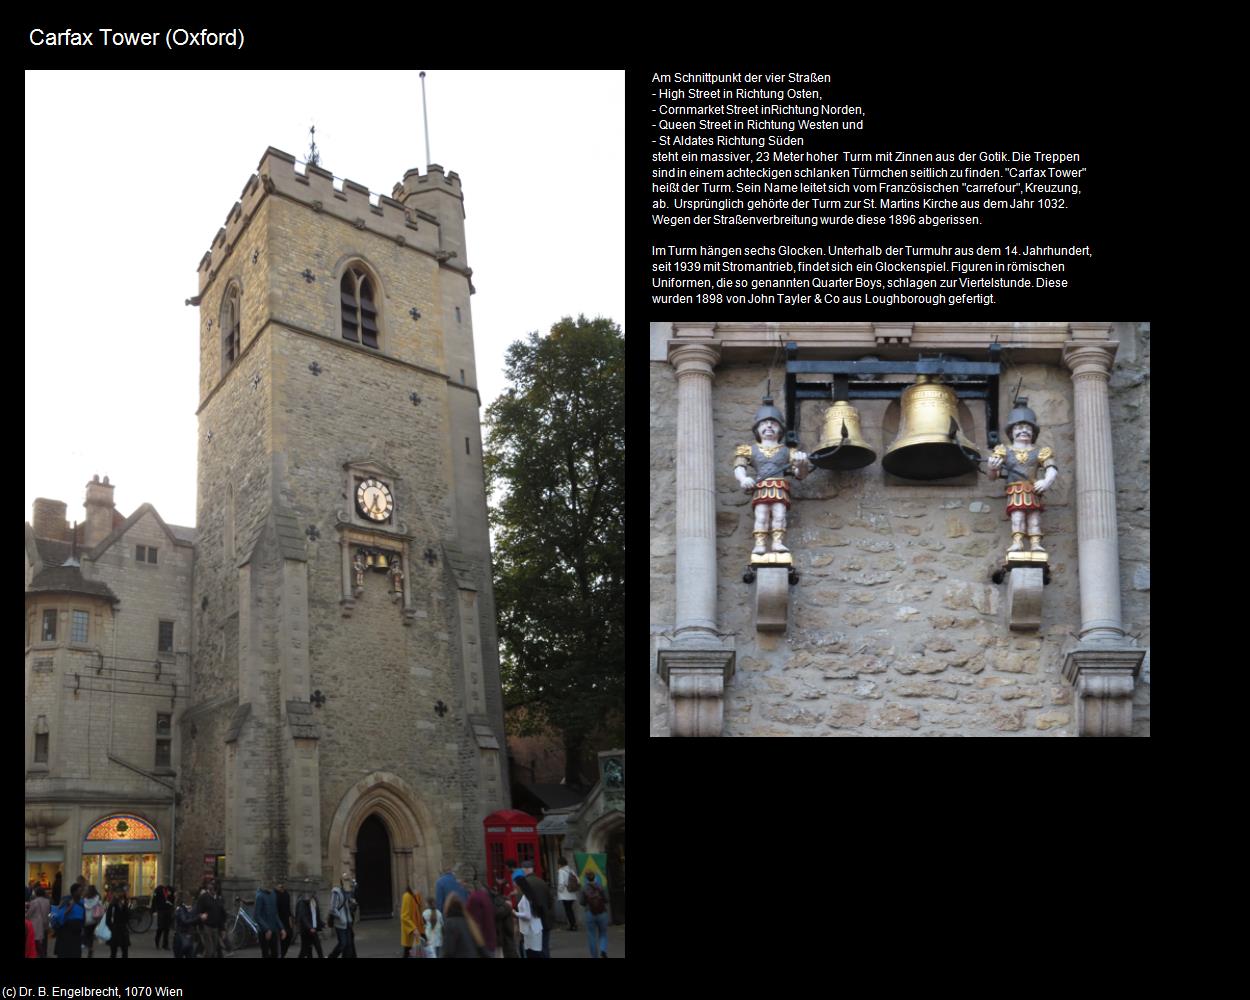 Carfax Tower  (Oxford, England) in Kulturatlas-ENGLAND und WALES